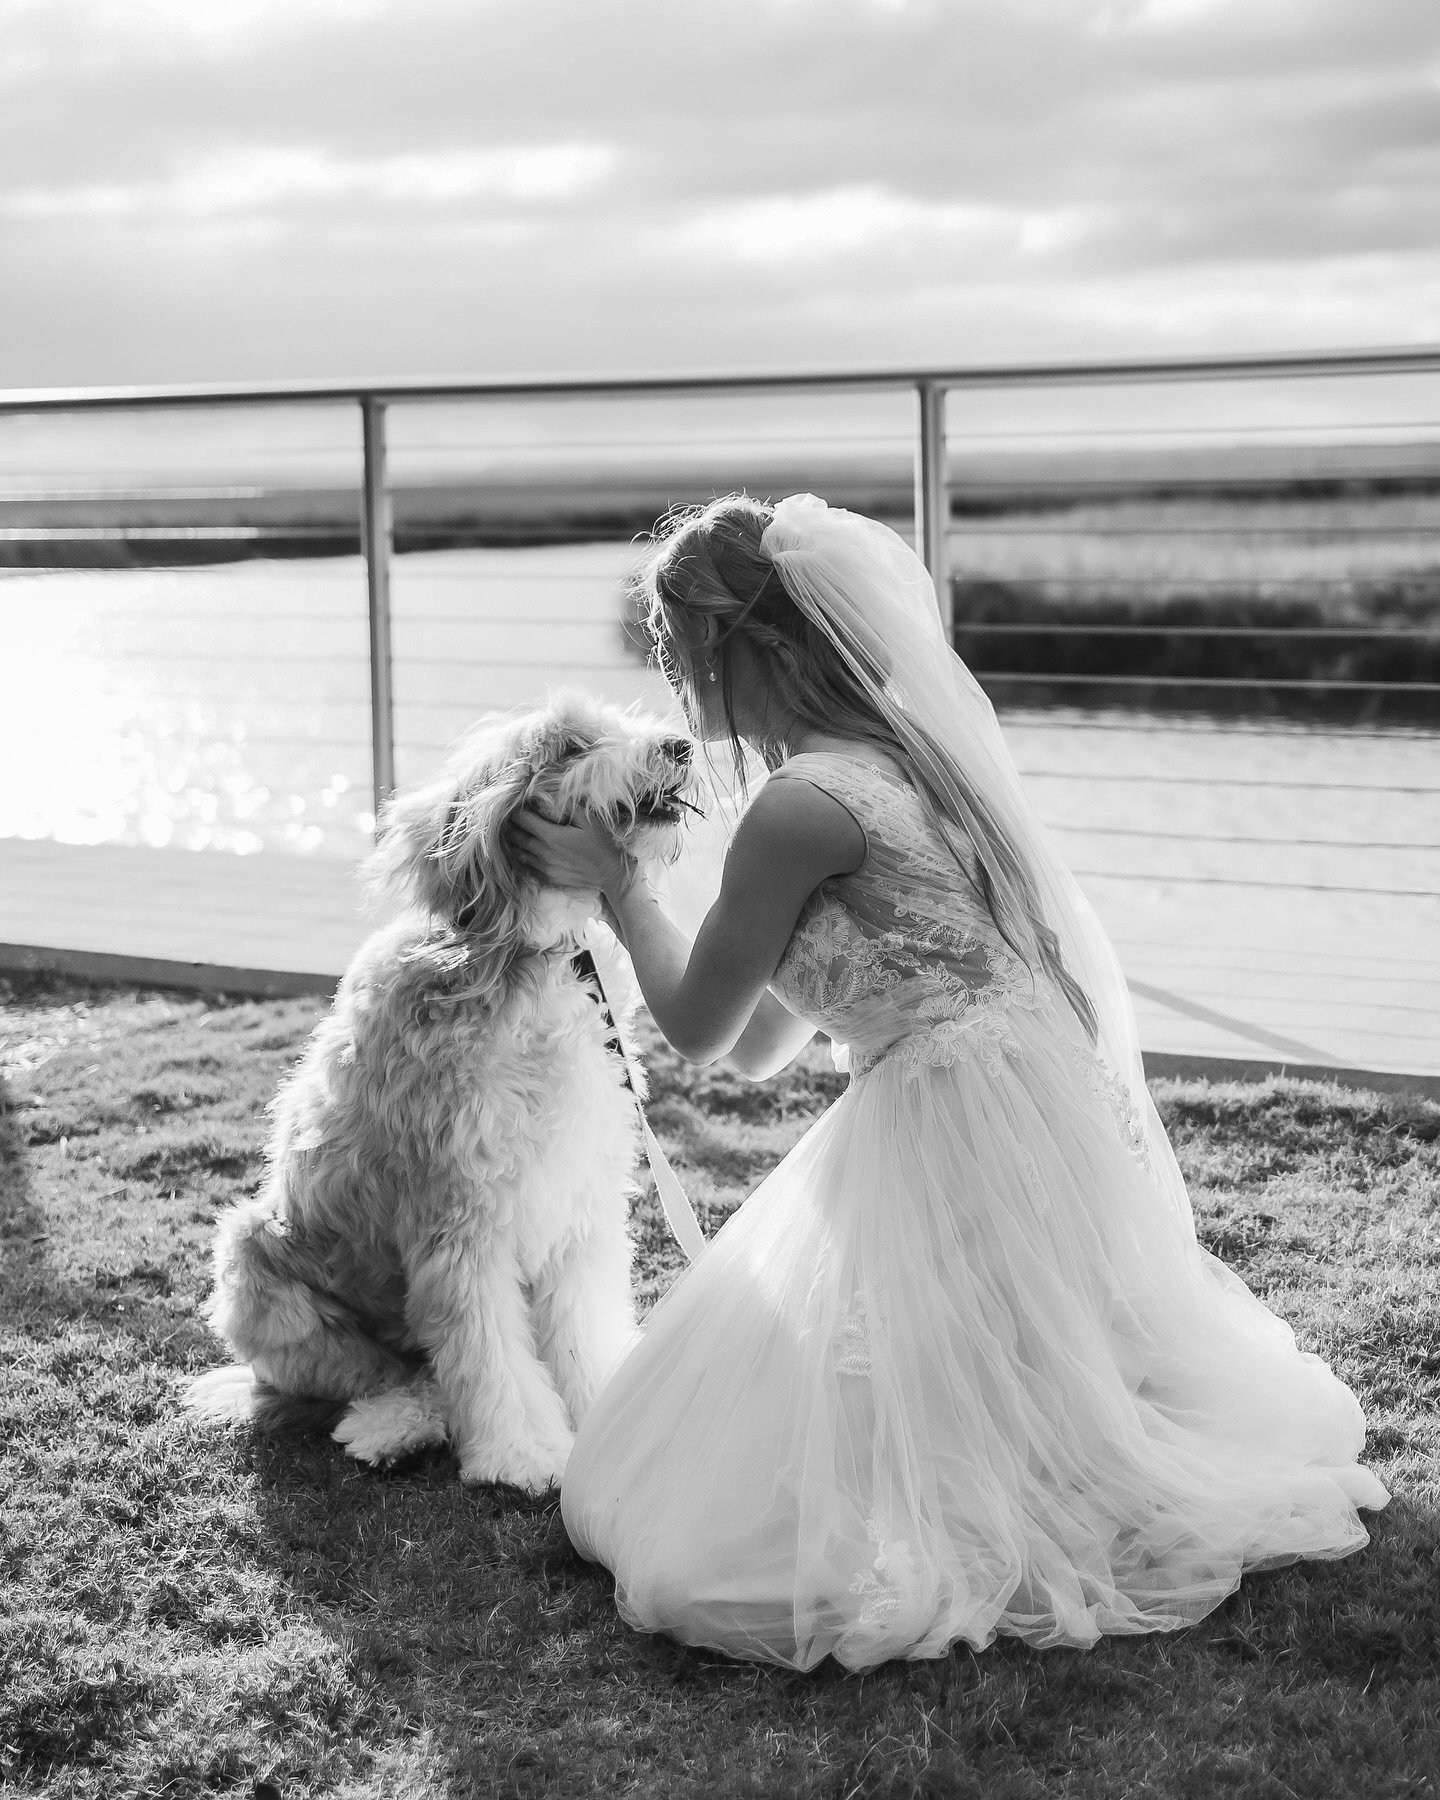 Dog Moms: the real MVPs of weddings! We love to see your fur babies steal the spotlight! 🐶💕 #daresayweddings #weddingphotography #dogmom #pawrents